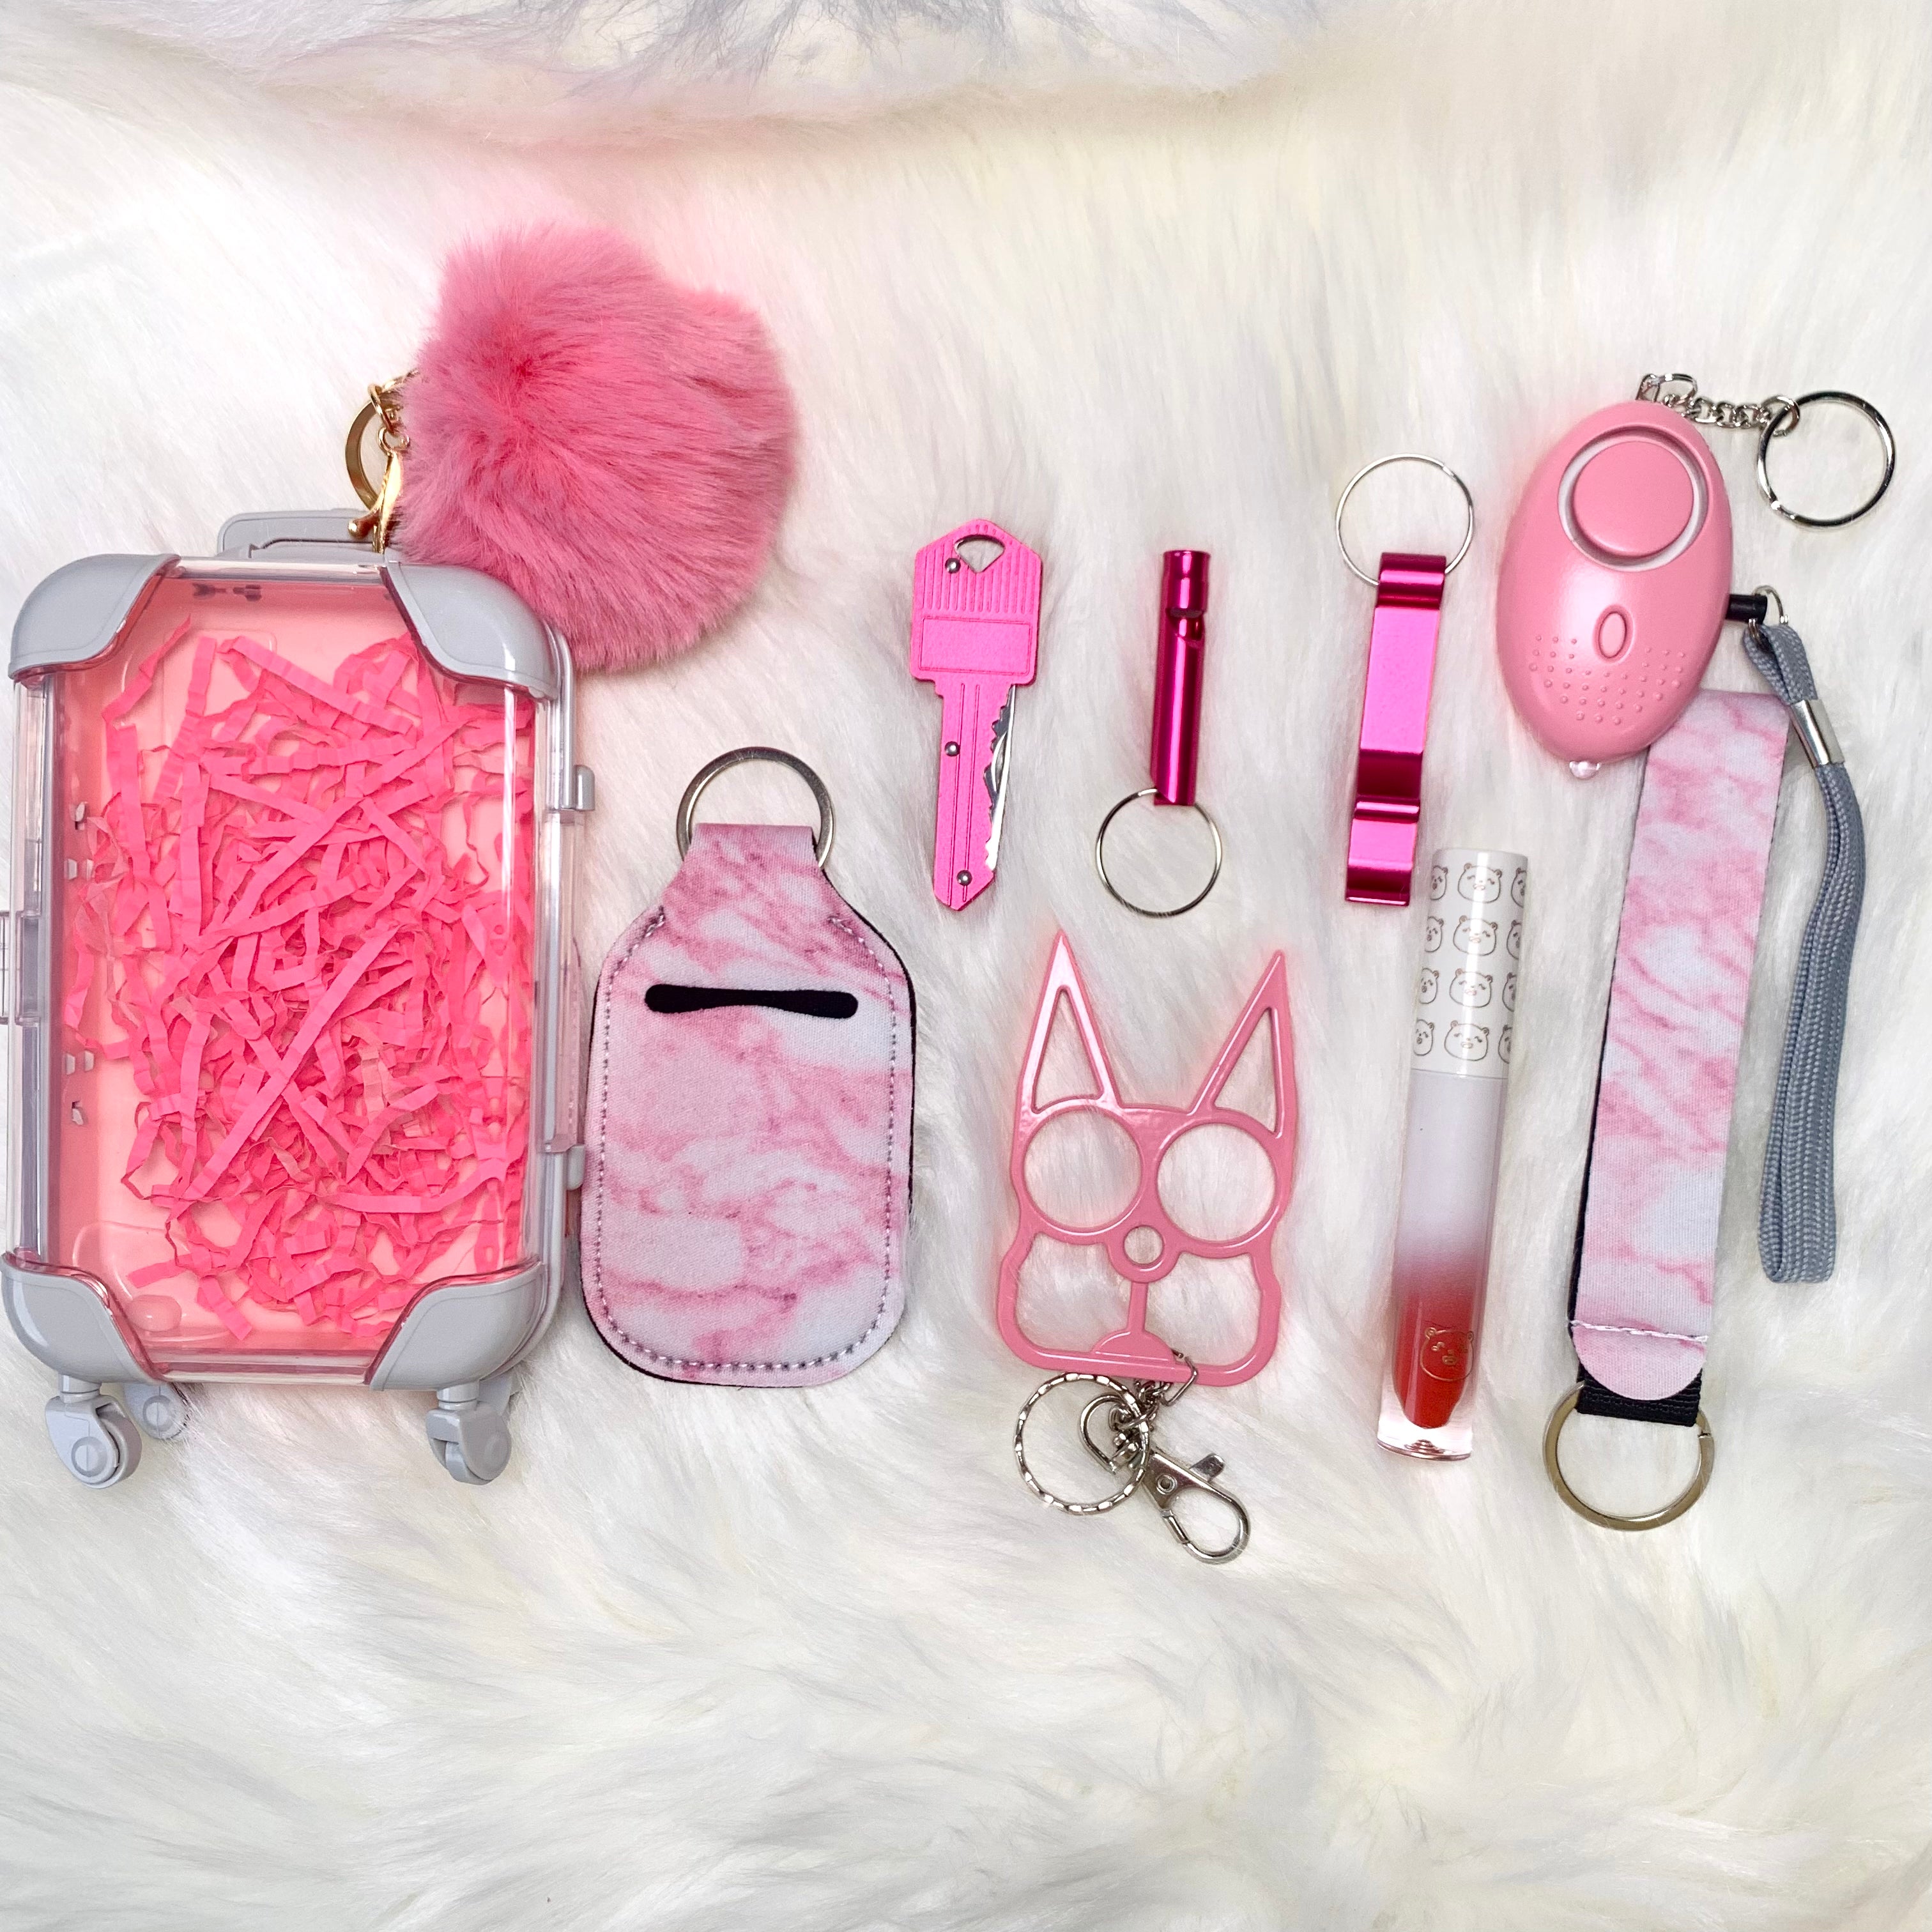 Keychain Set for Girls & Women 10pcs With Minisuitcase - Pink